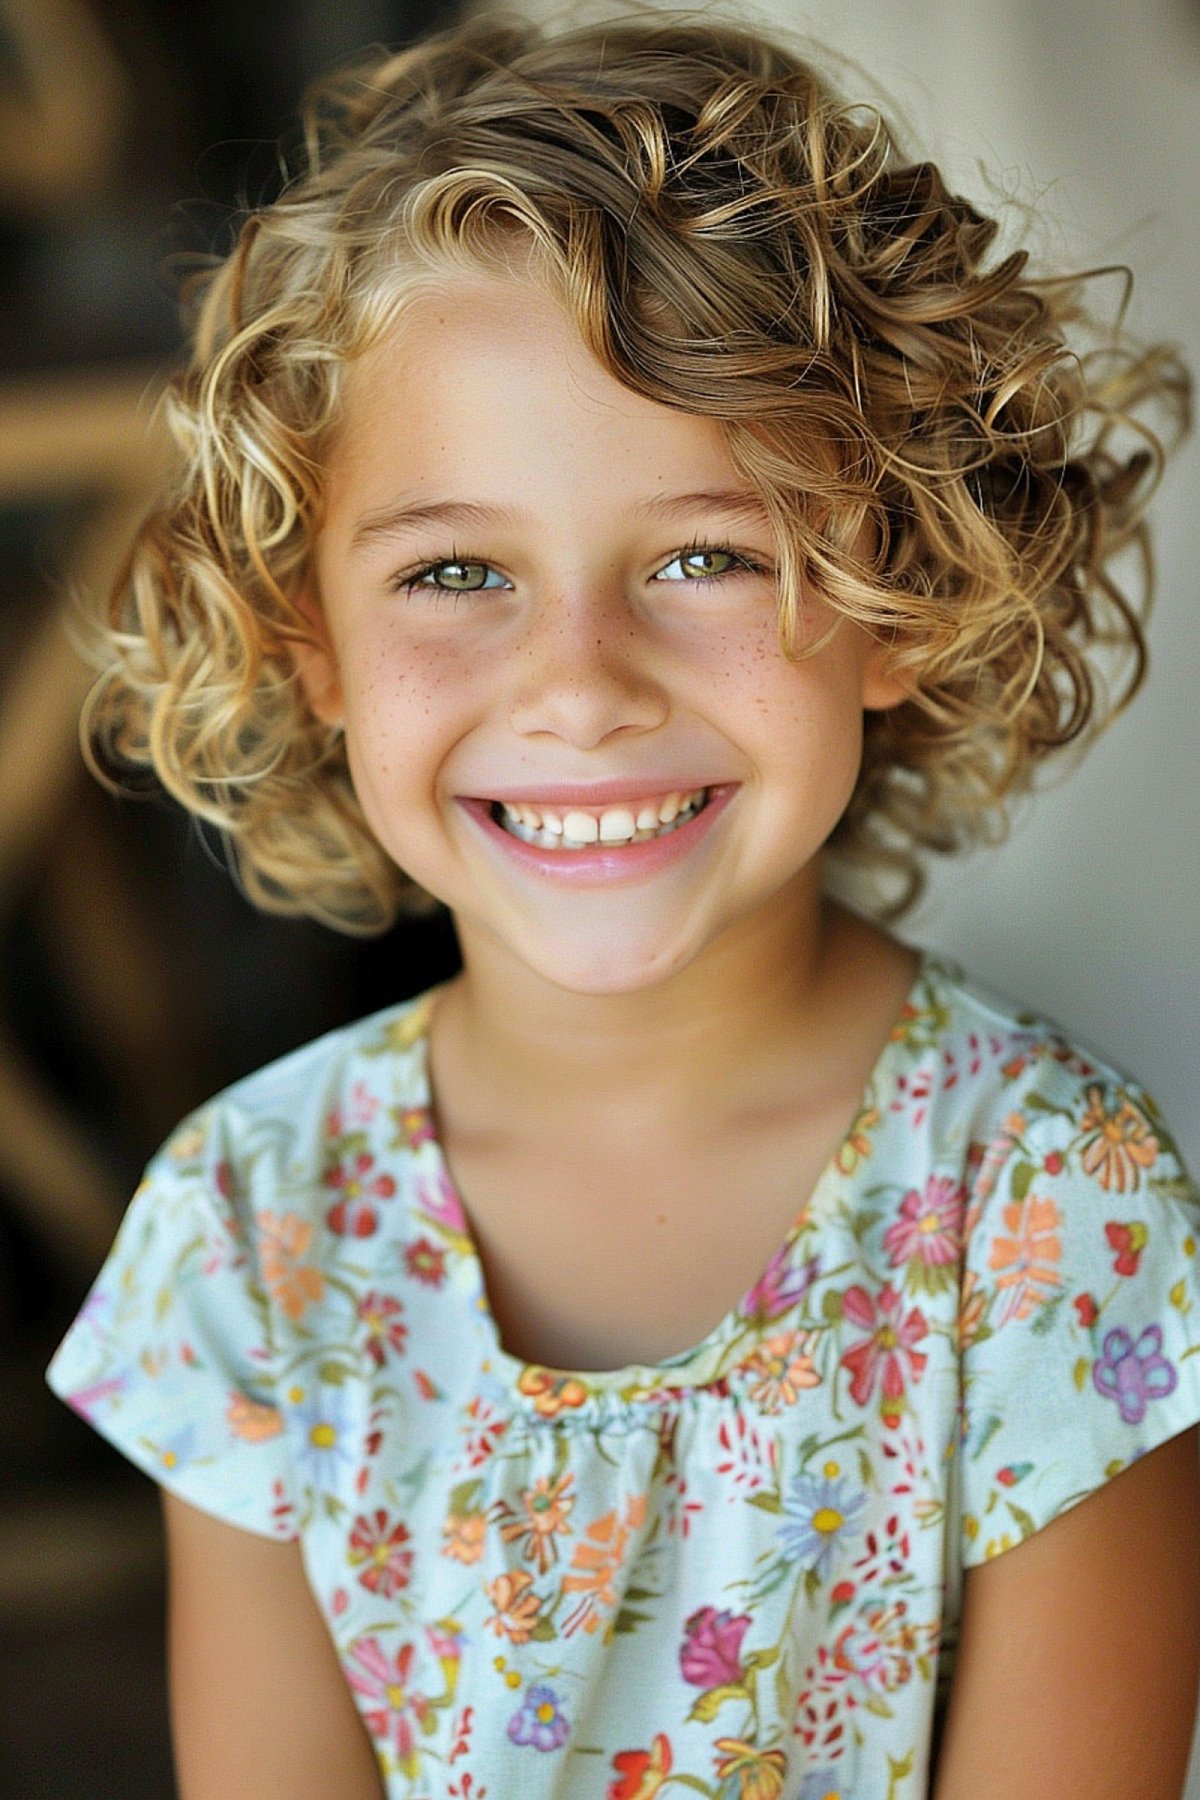 Young girl with short blonde curly hair for school